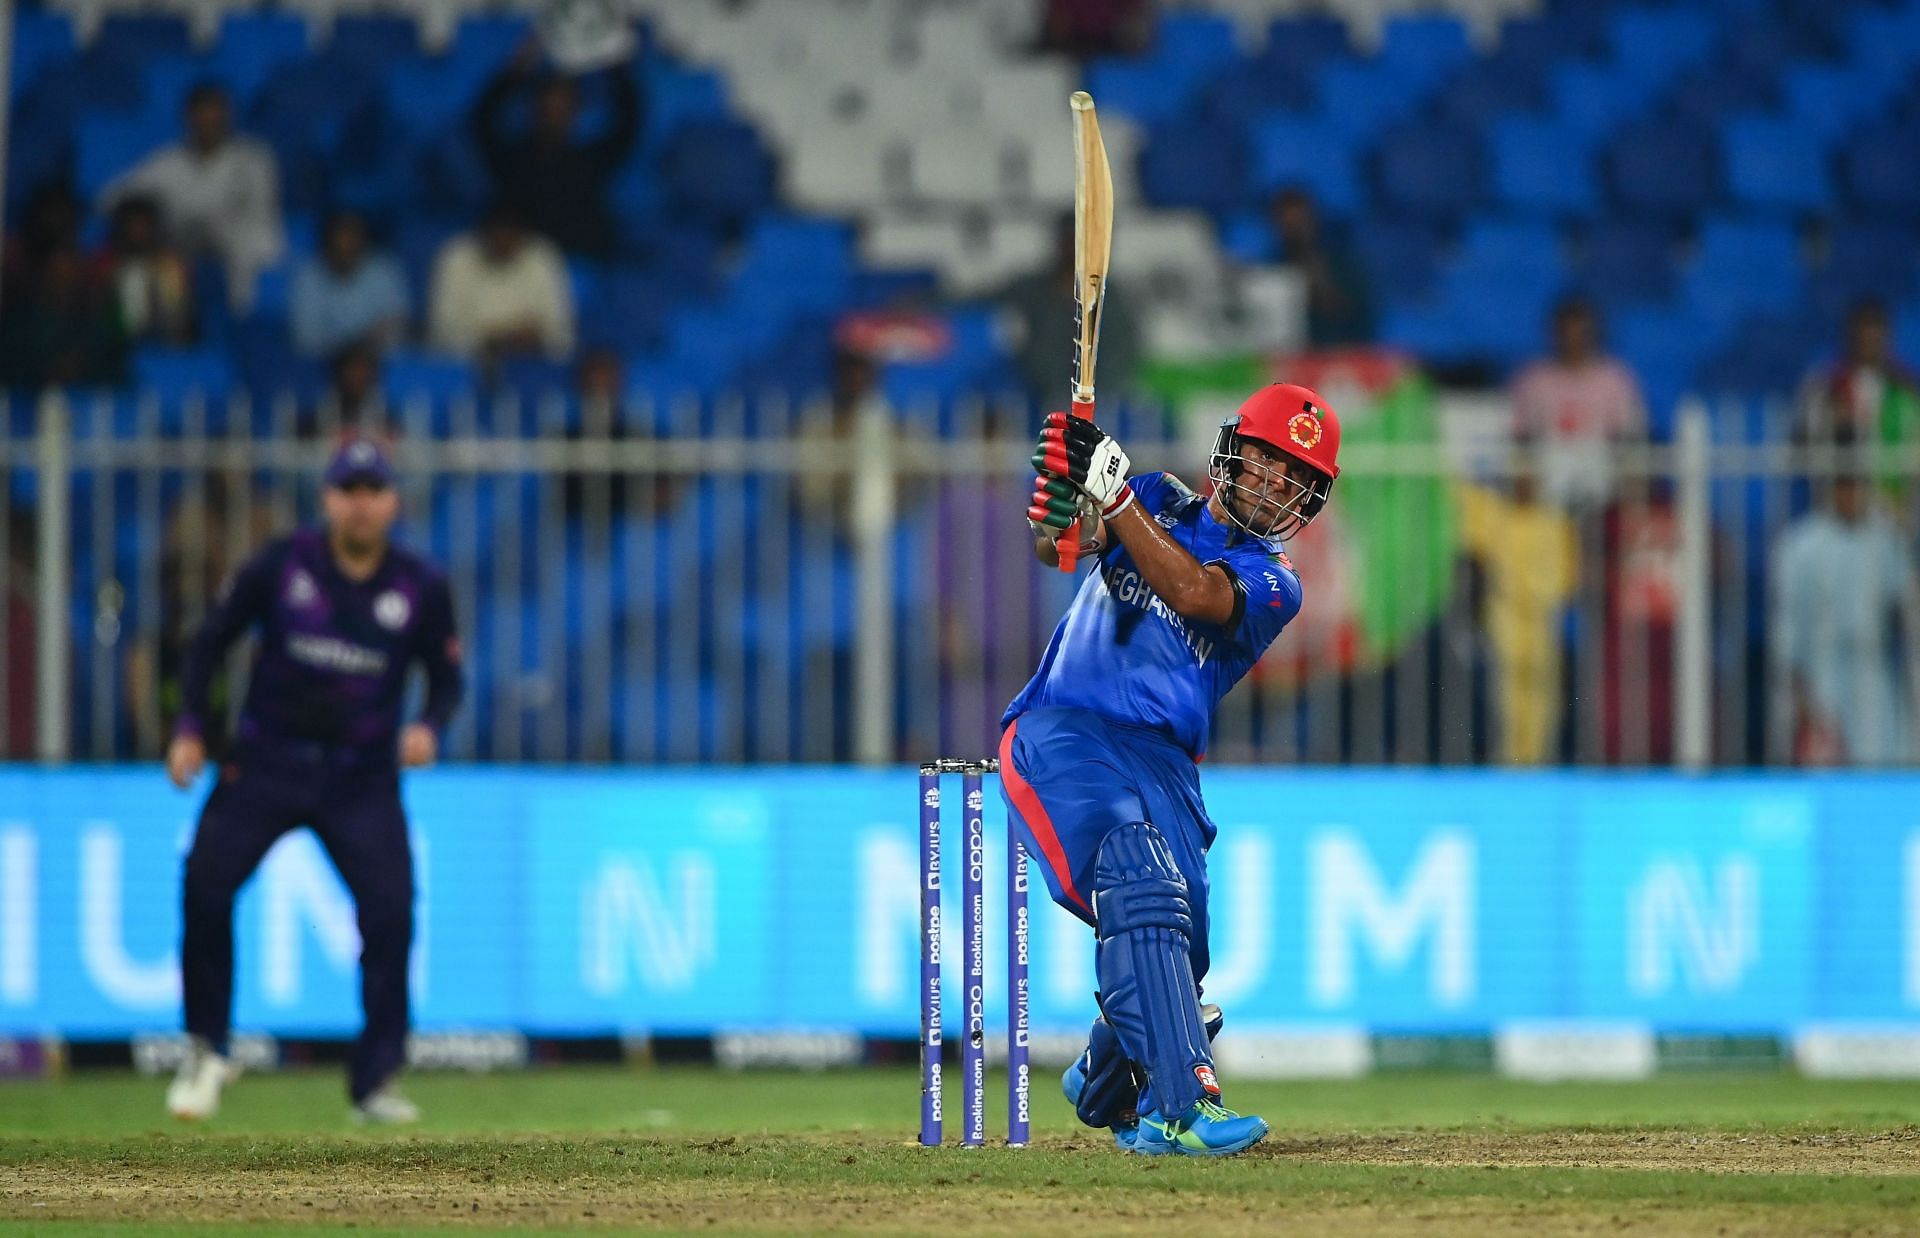 Najibullah Zadran is expected to play an important role for his side